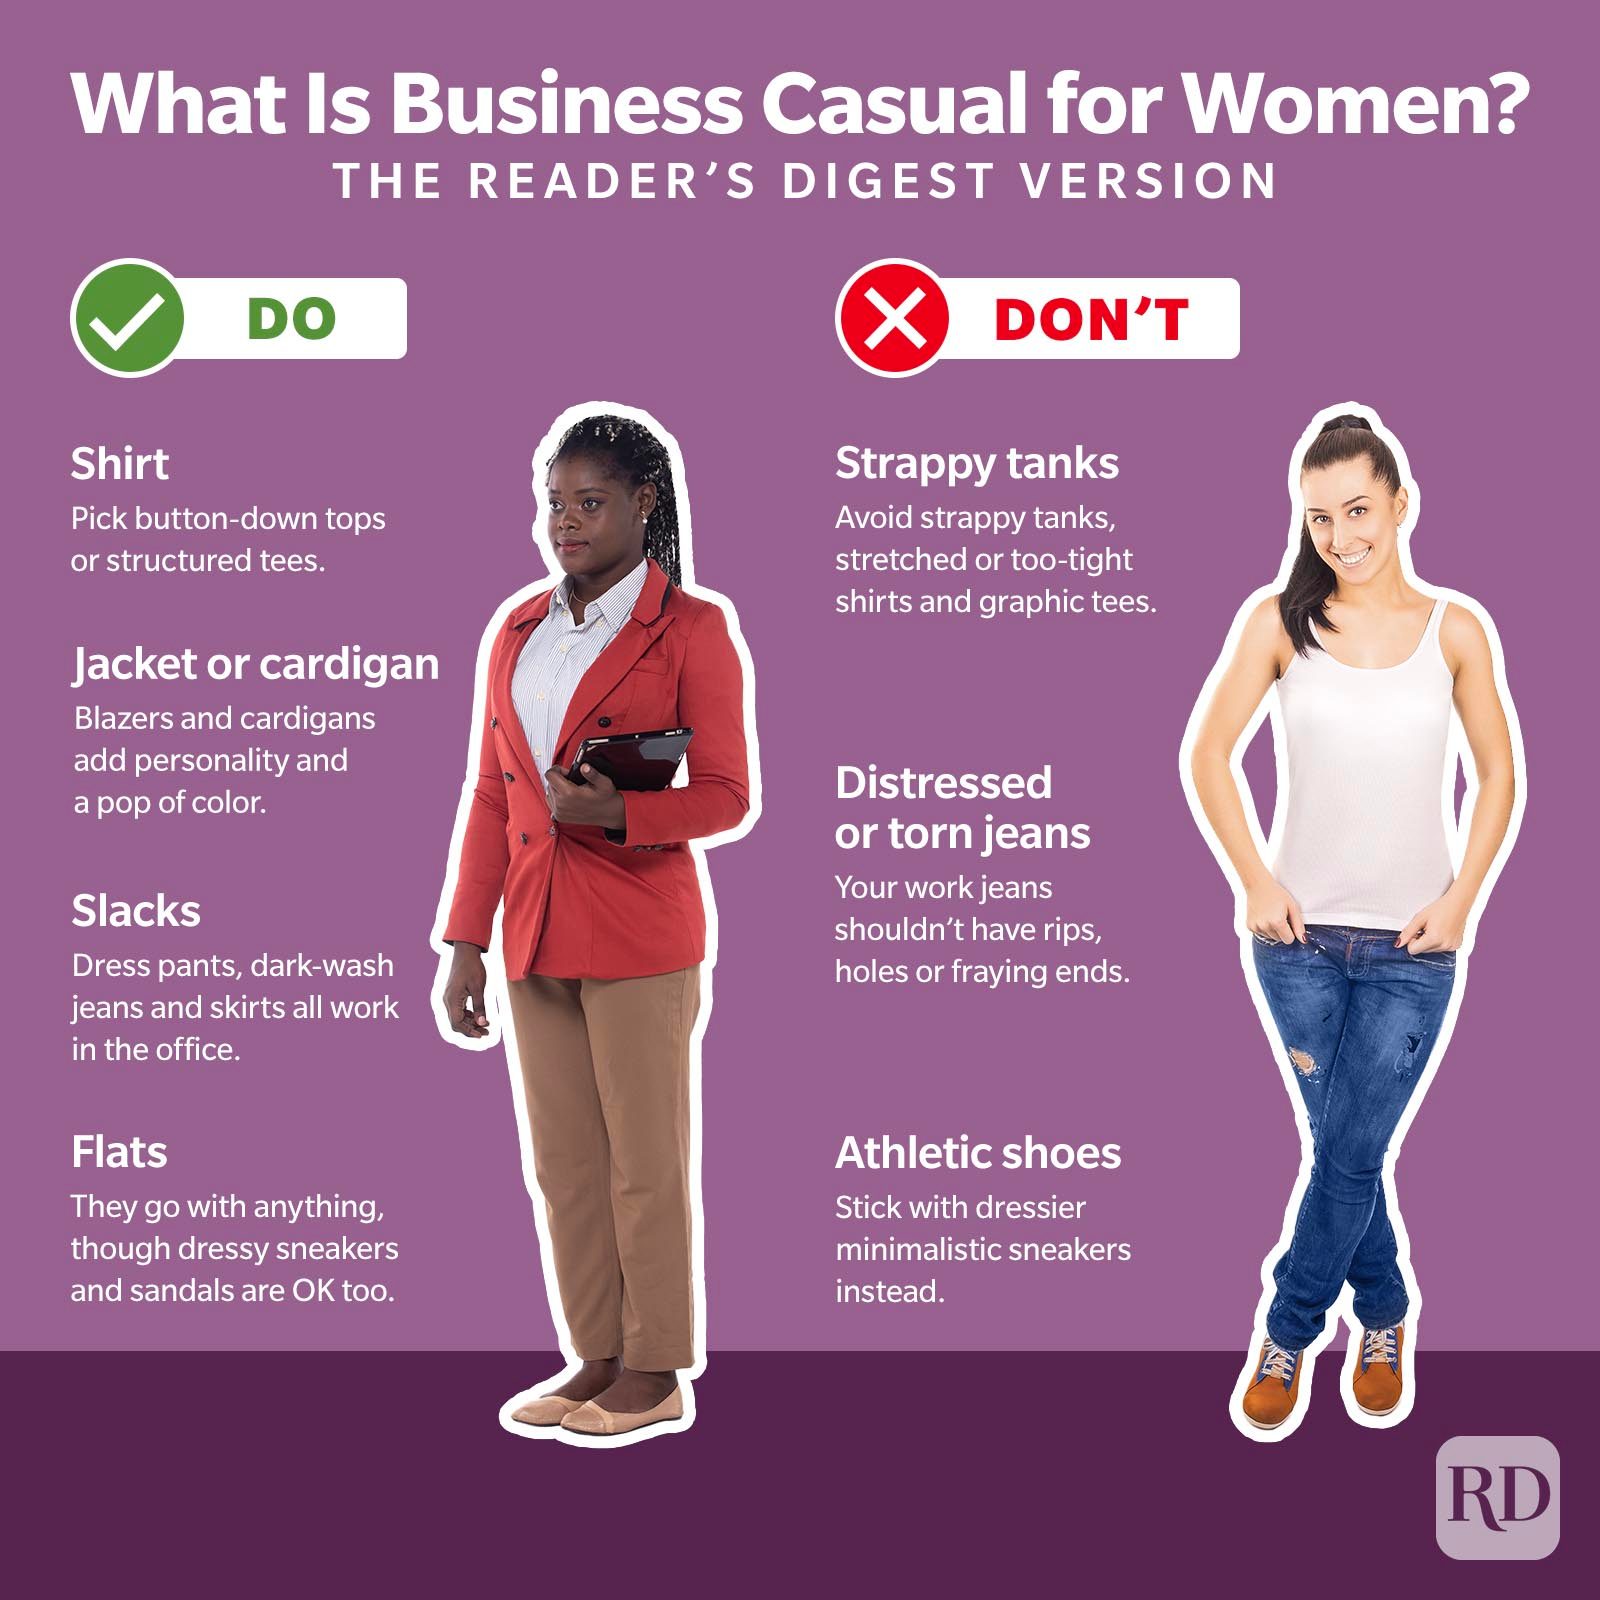 What Is Business Casual? Fashion Experts Explain How to Dress for Work